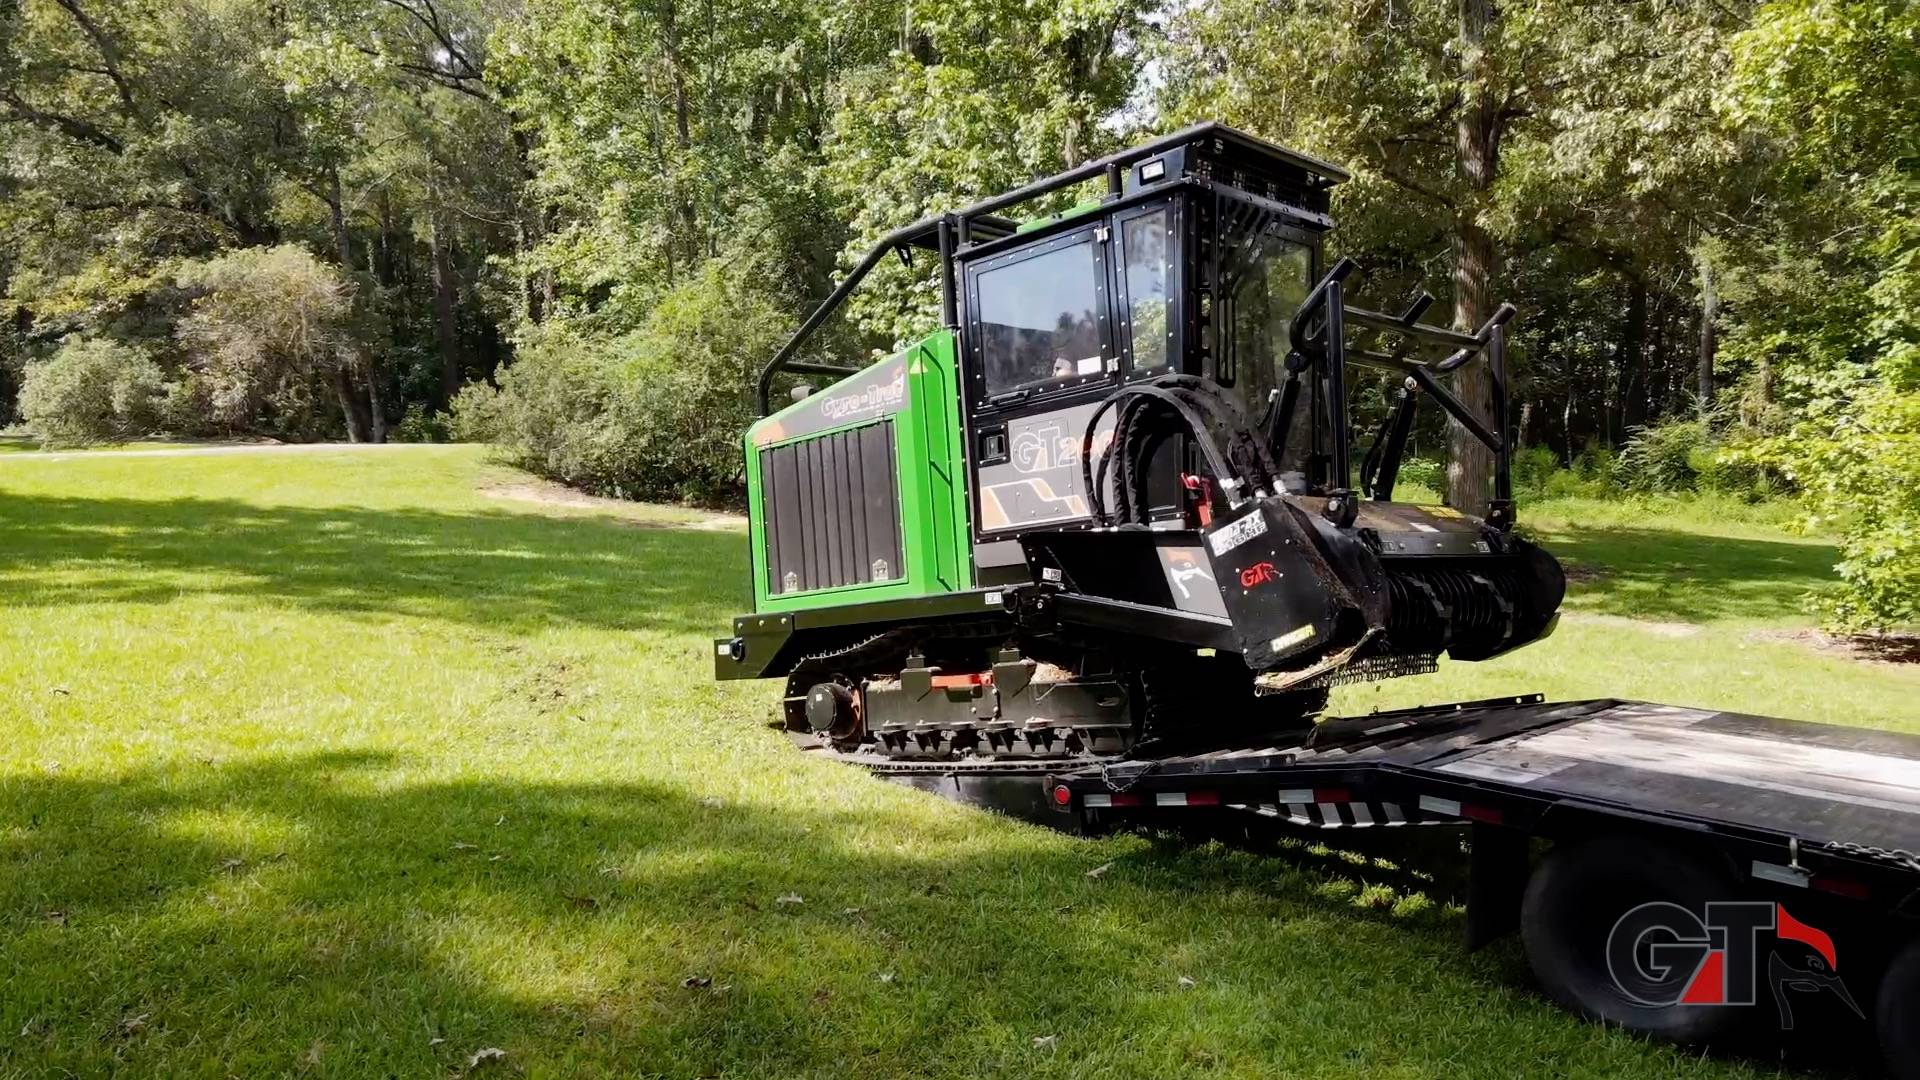 Best Dedicated Forestry Mulcher of 2023: the GT-200 Forestry Mulcher by Gyro-Trac